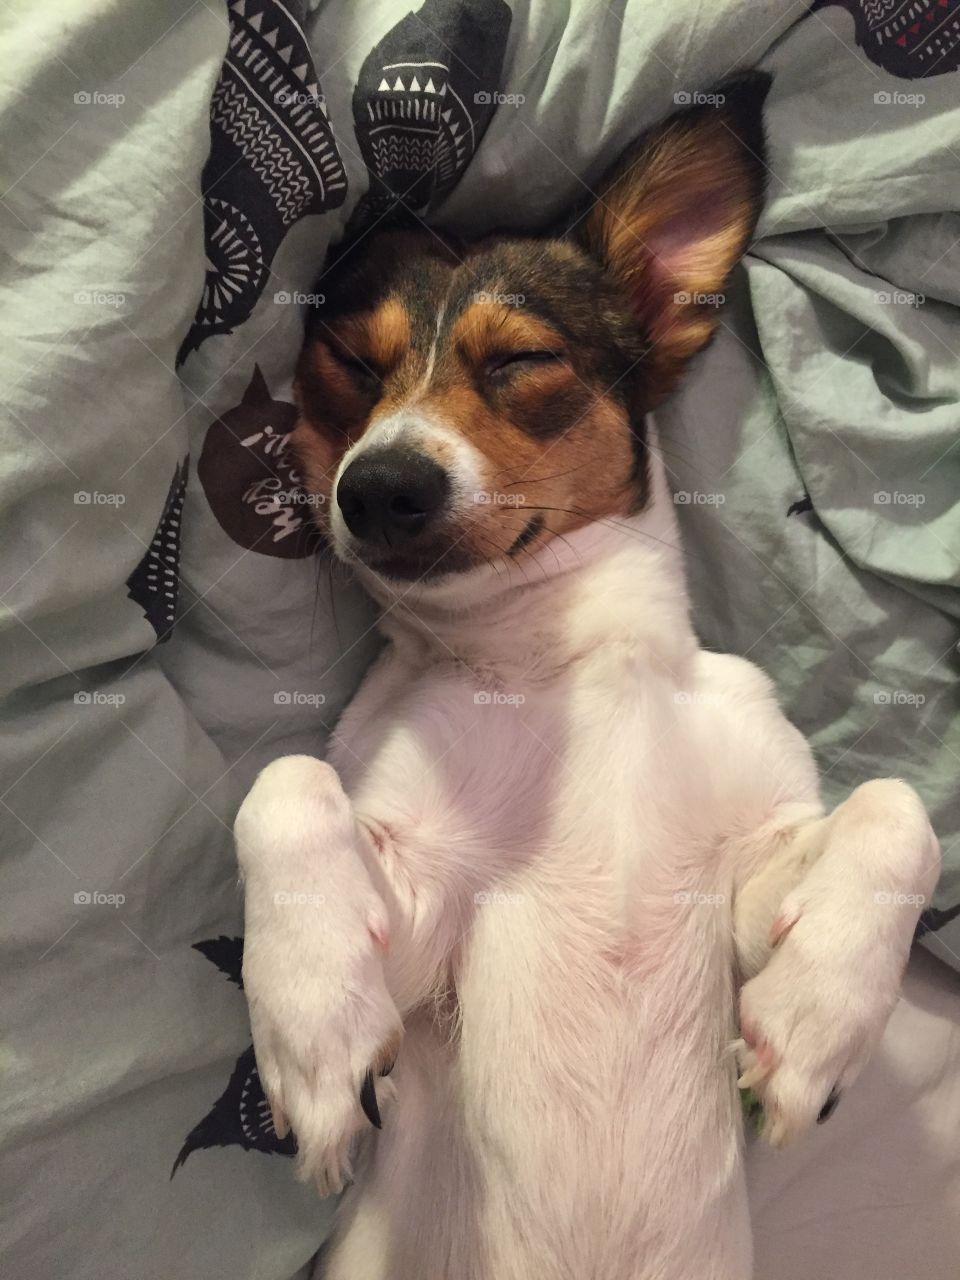 Sleeping beauty: a cute mixed breed dog is sleeping on a bed with the paws lifted